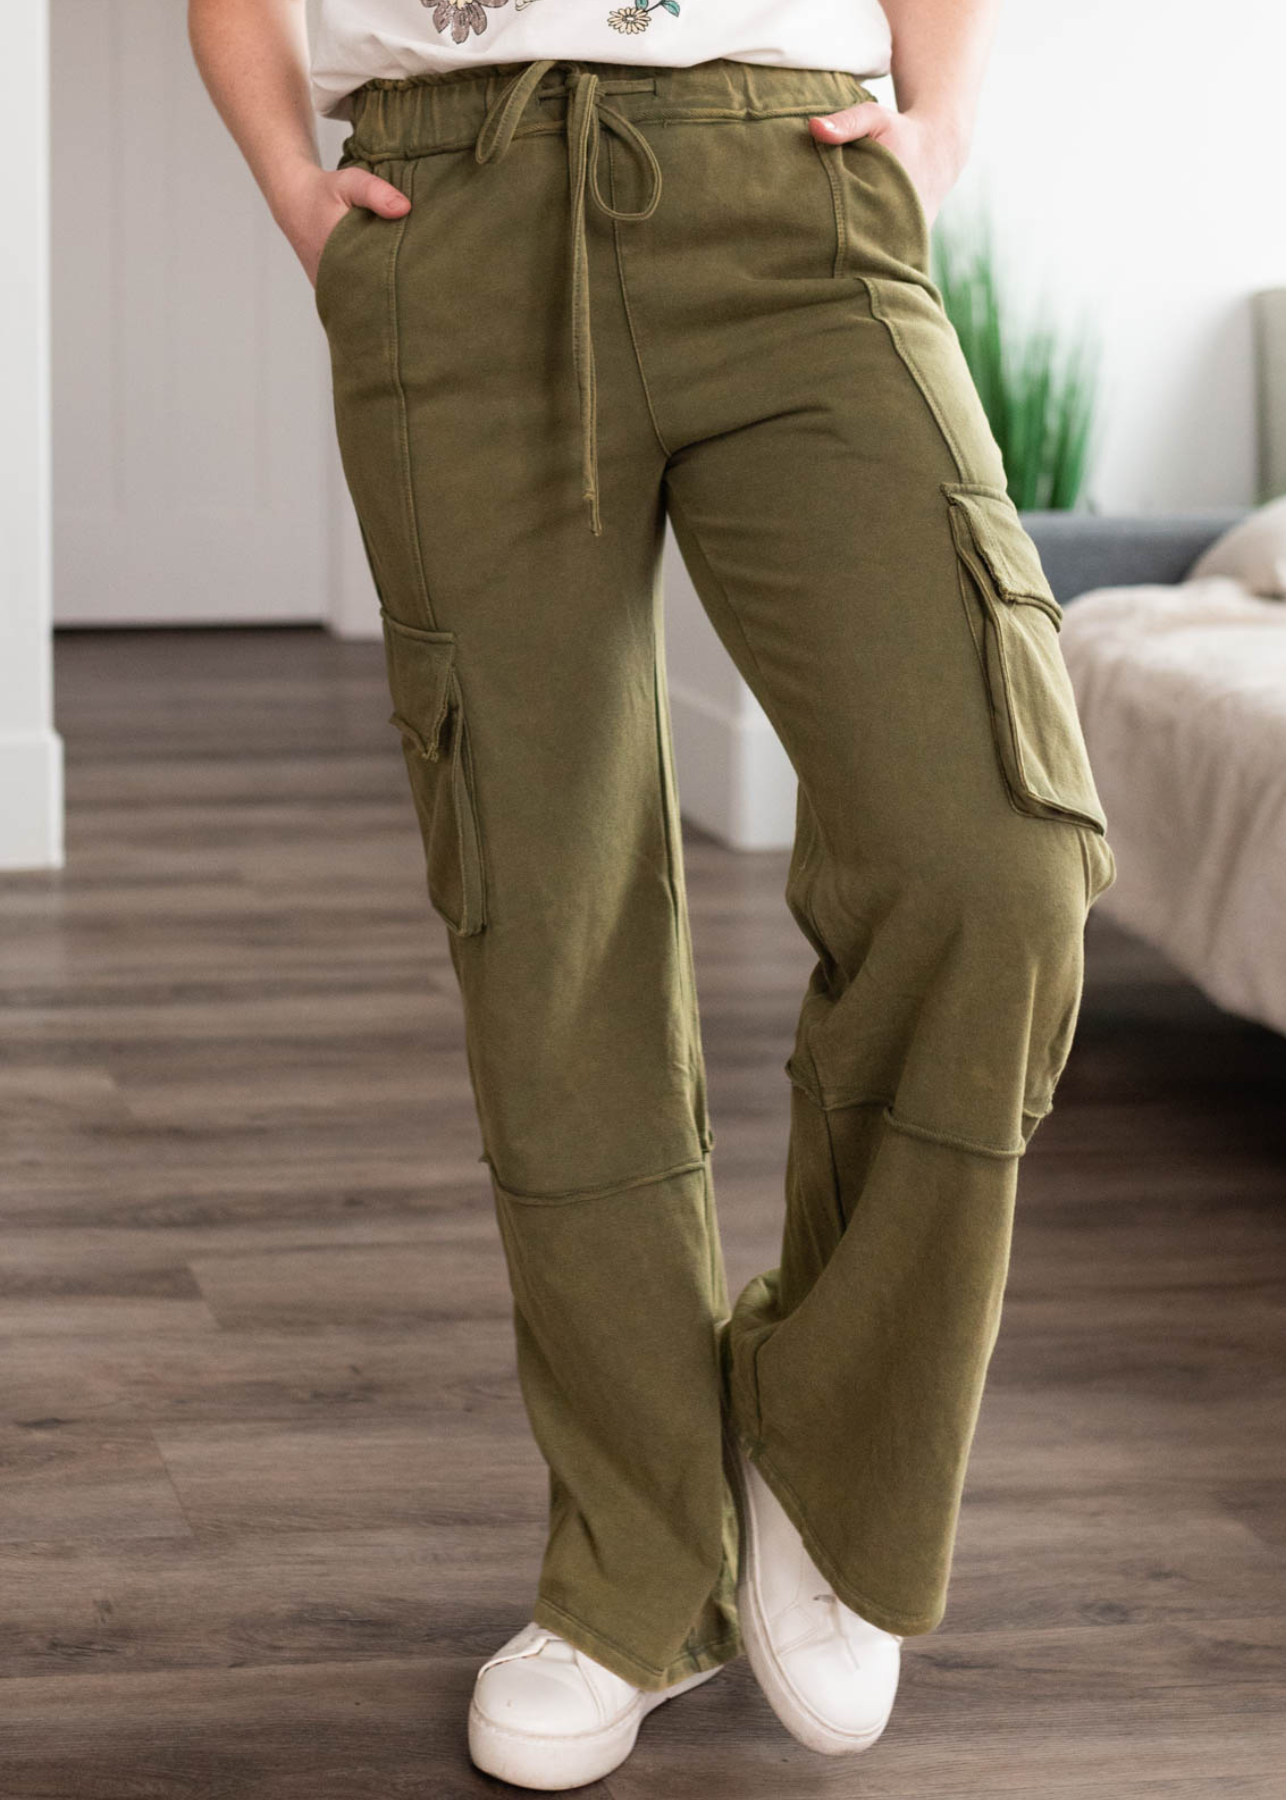 Olive pants with side pockets